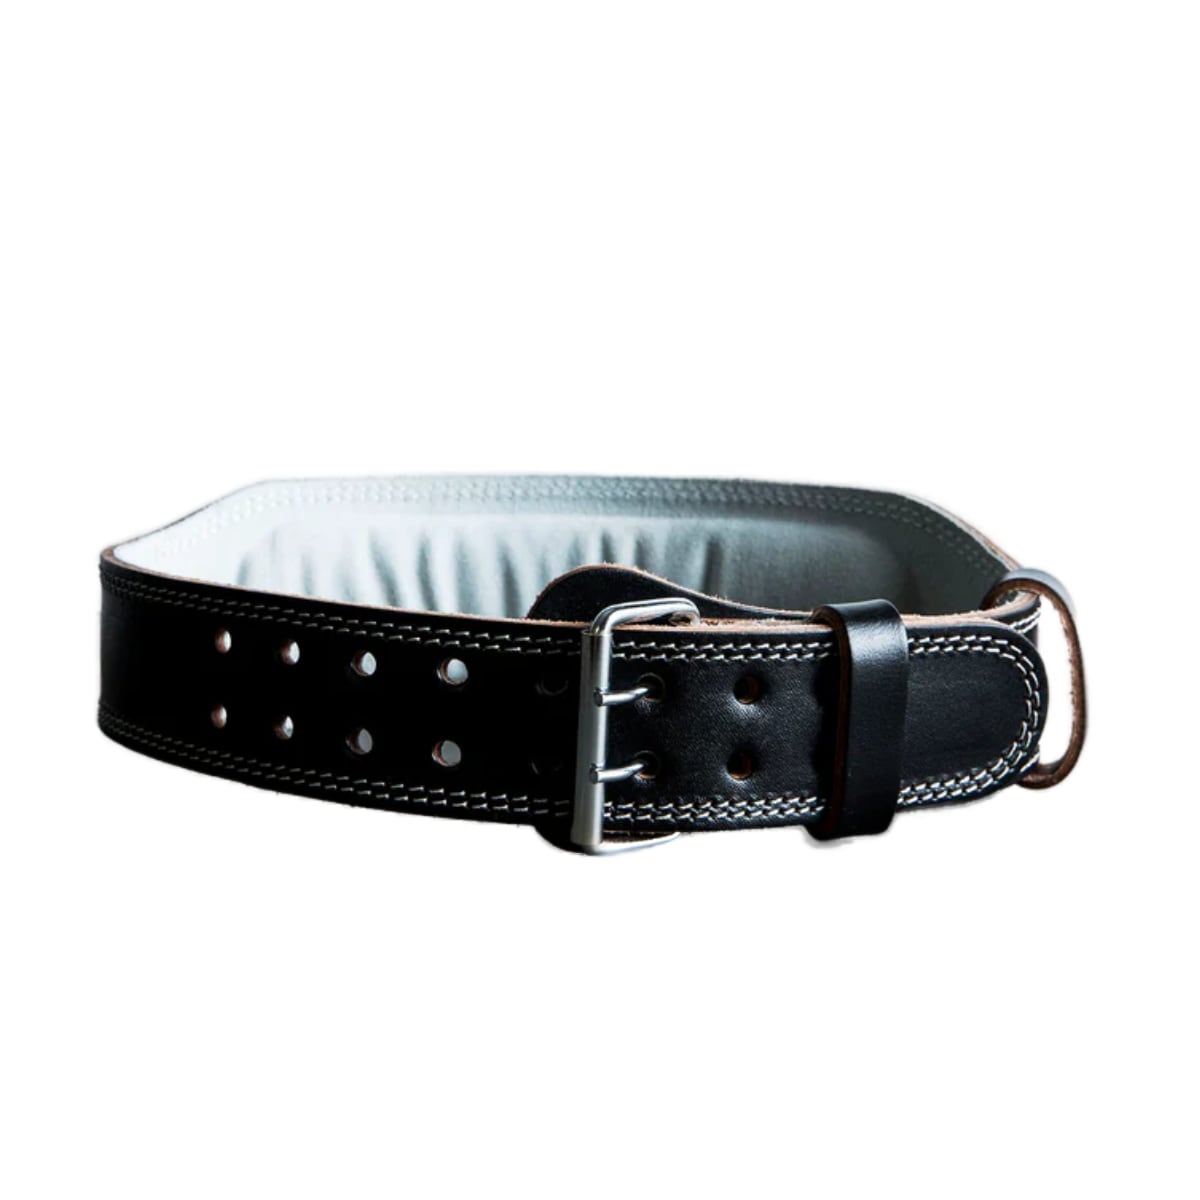 Weightlifting Belt Small